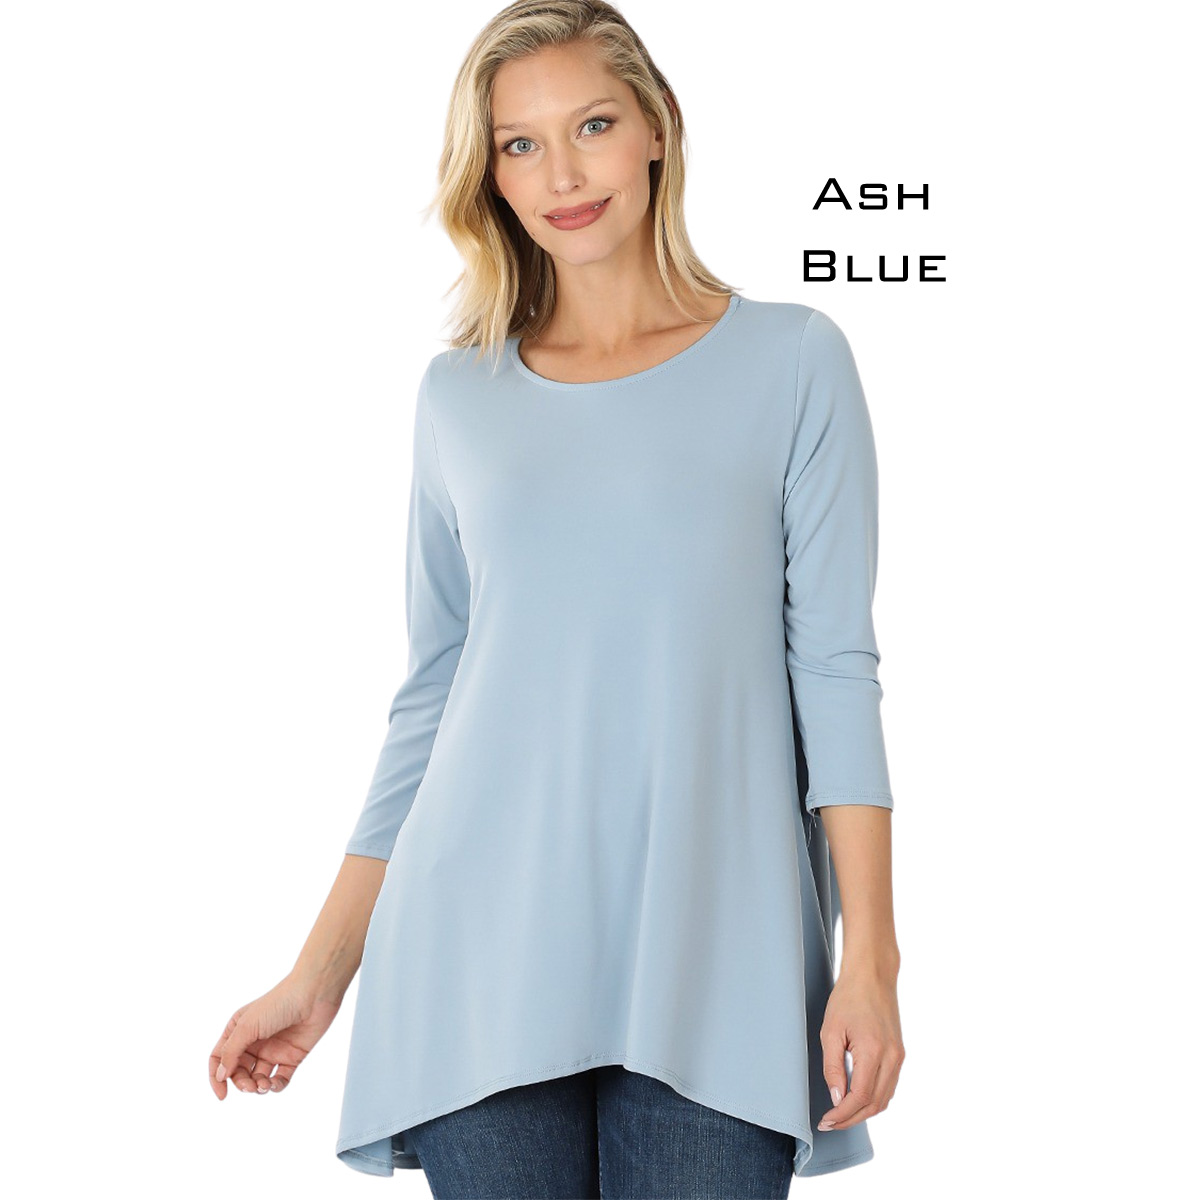 2367 - Ity High-Low 3/4 Sleeve Top ASH BLUE Ity High-Low 3/4 Sleeve Top 2367 - Large